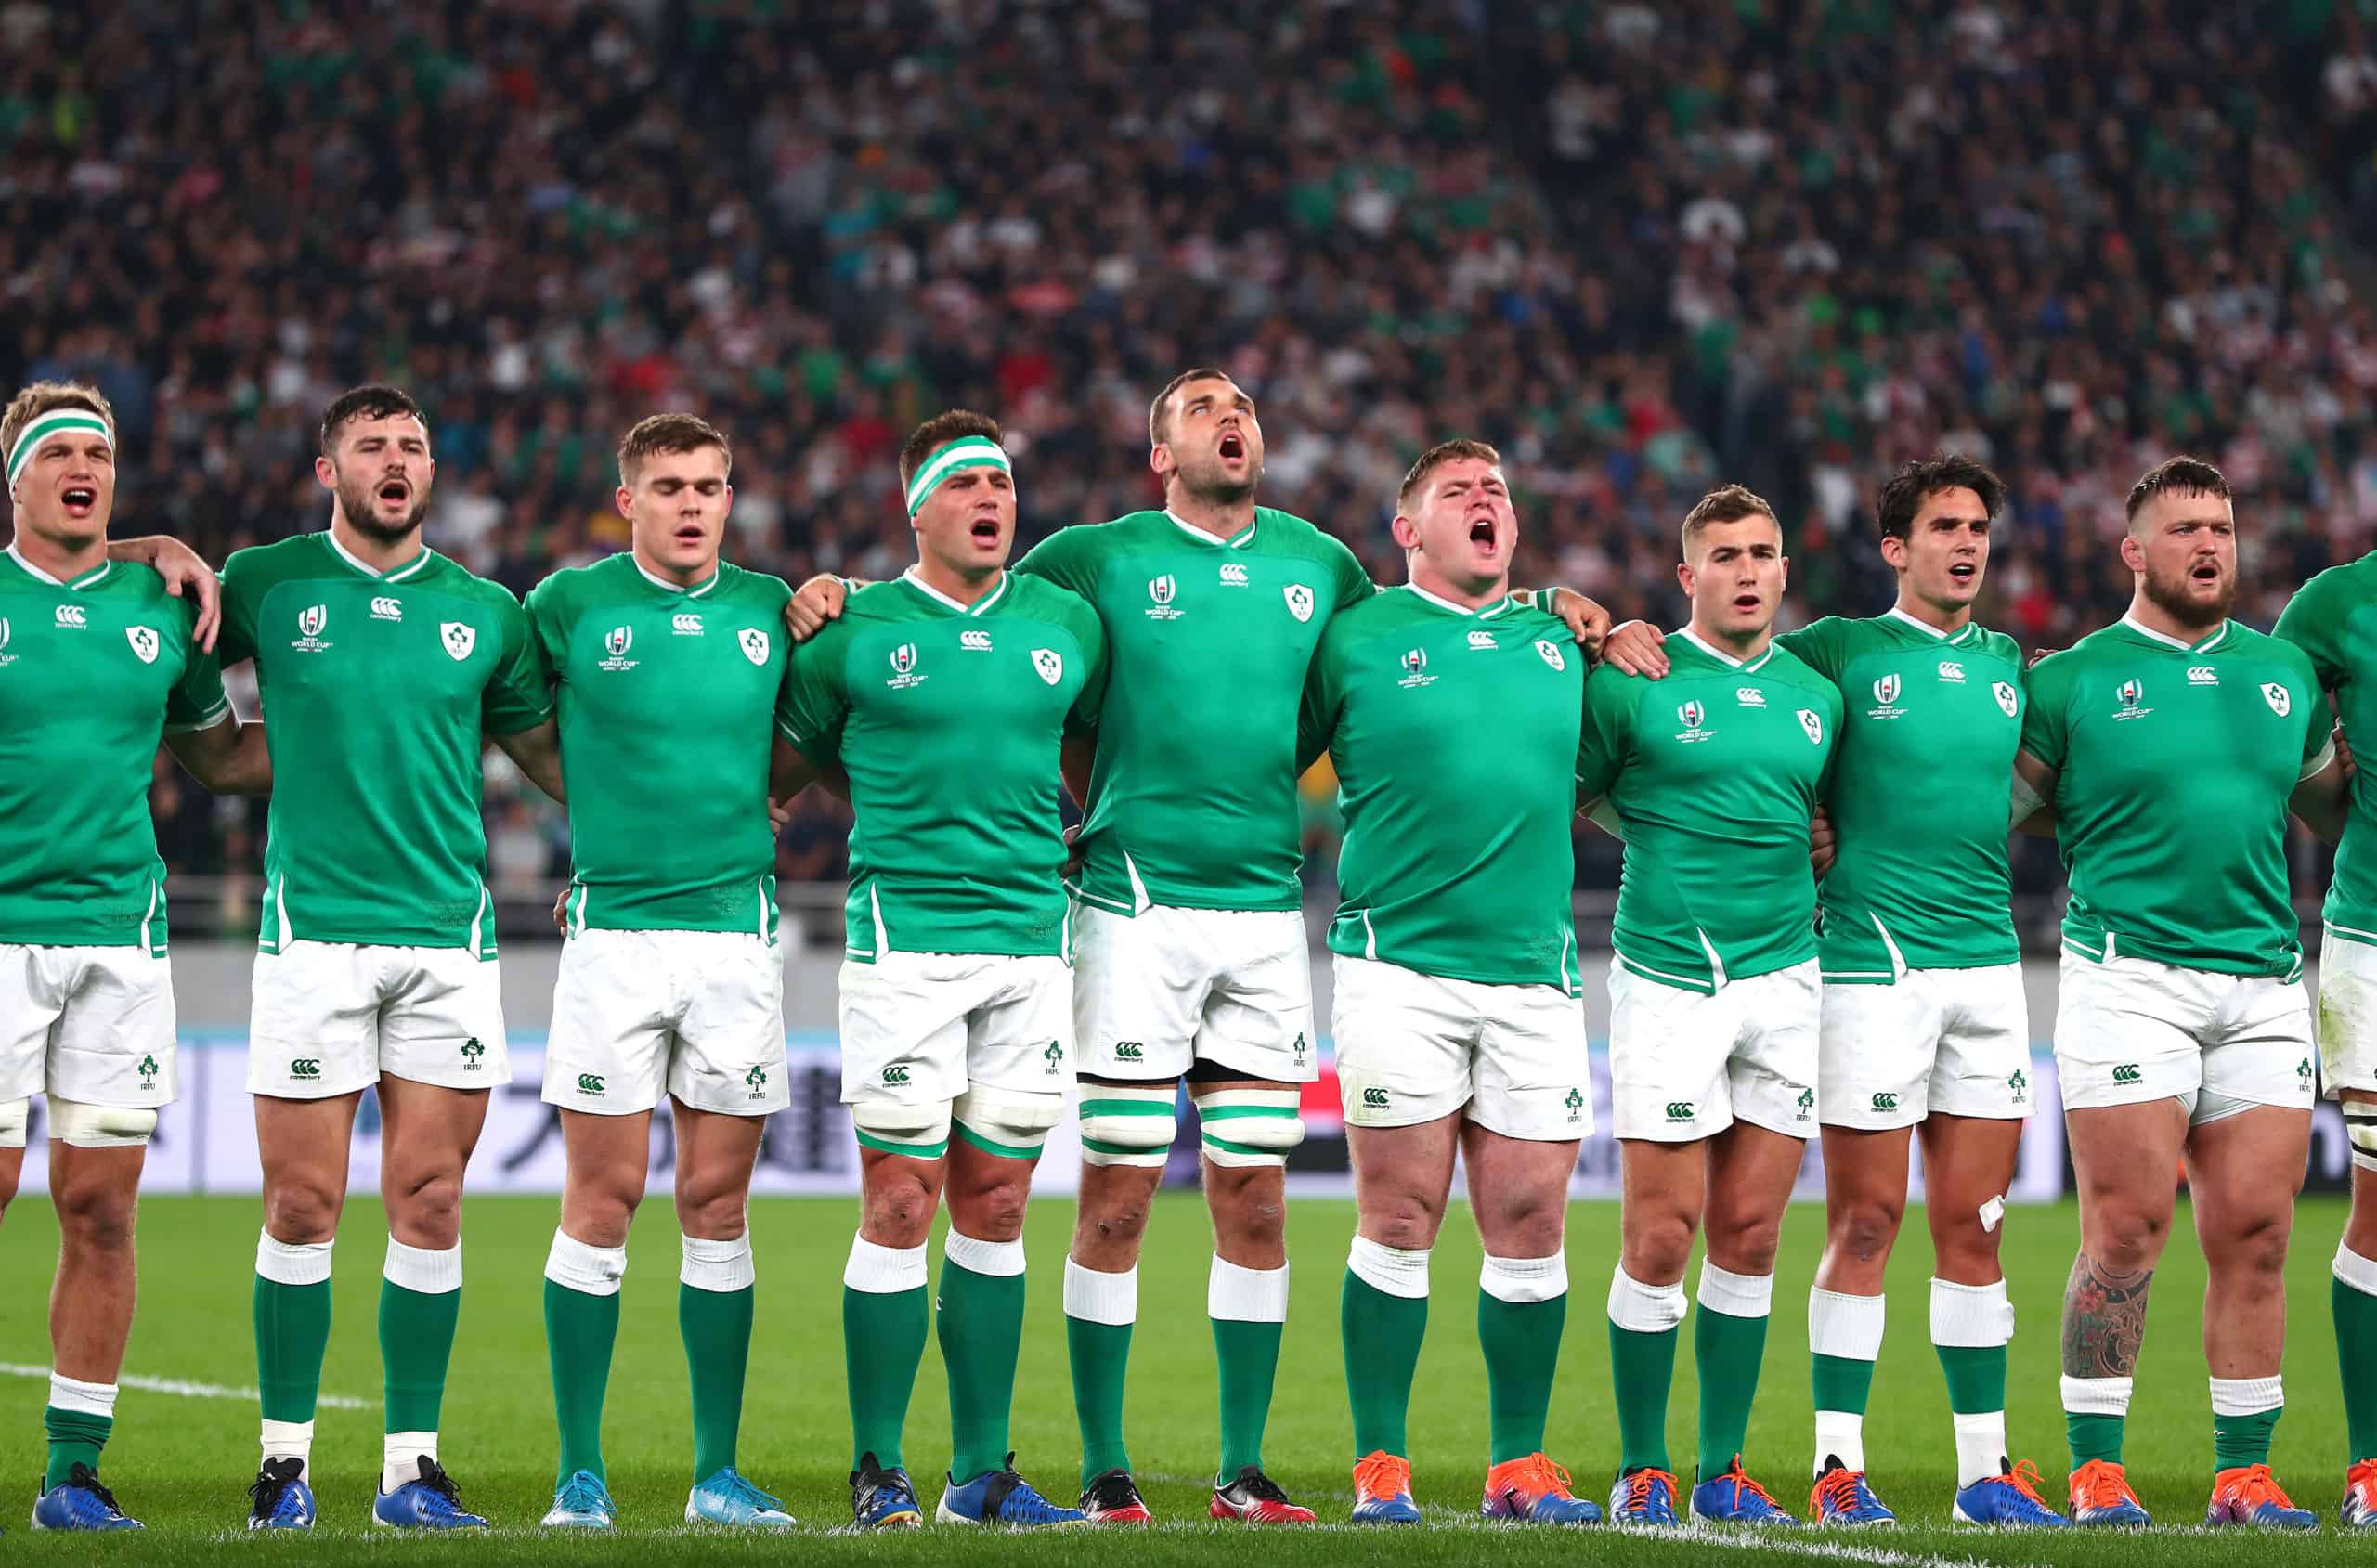 Rugby World Cup France – Will Ireland go all the way?